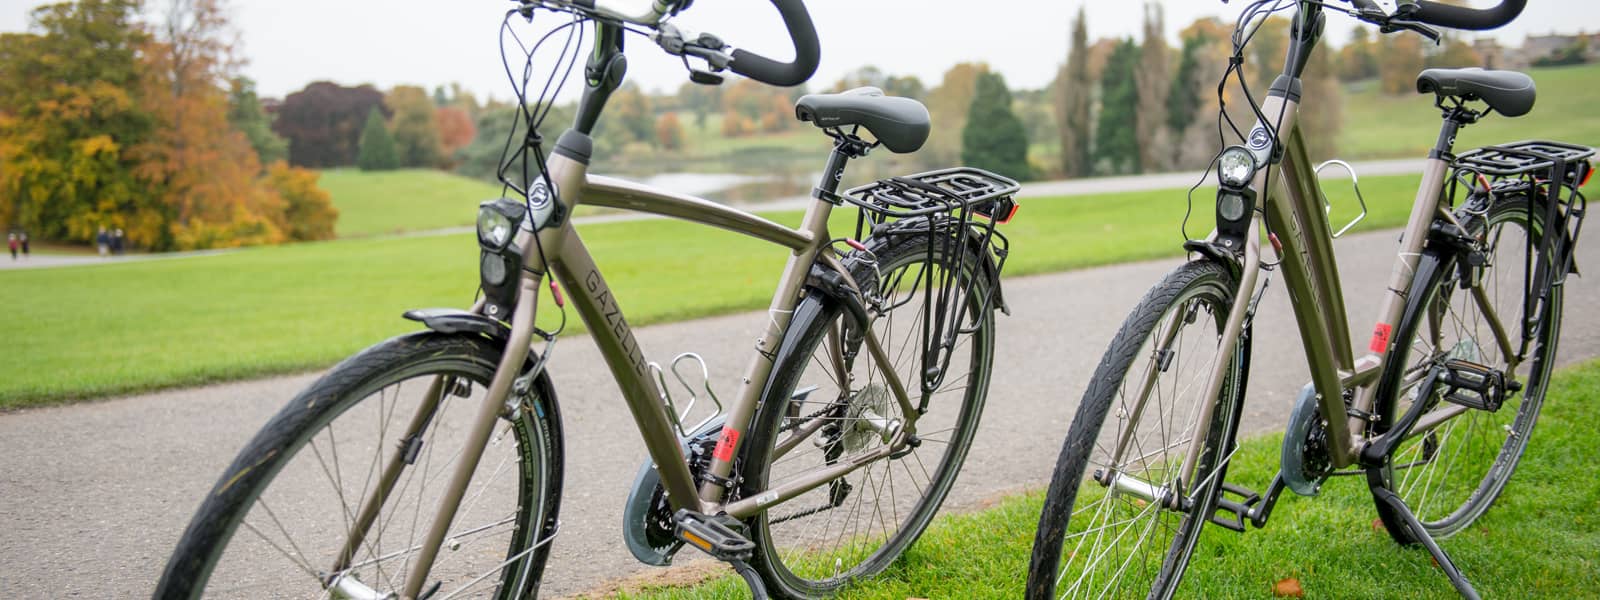 Choose the right bike and equipment for you and your route.